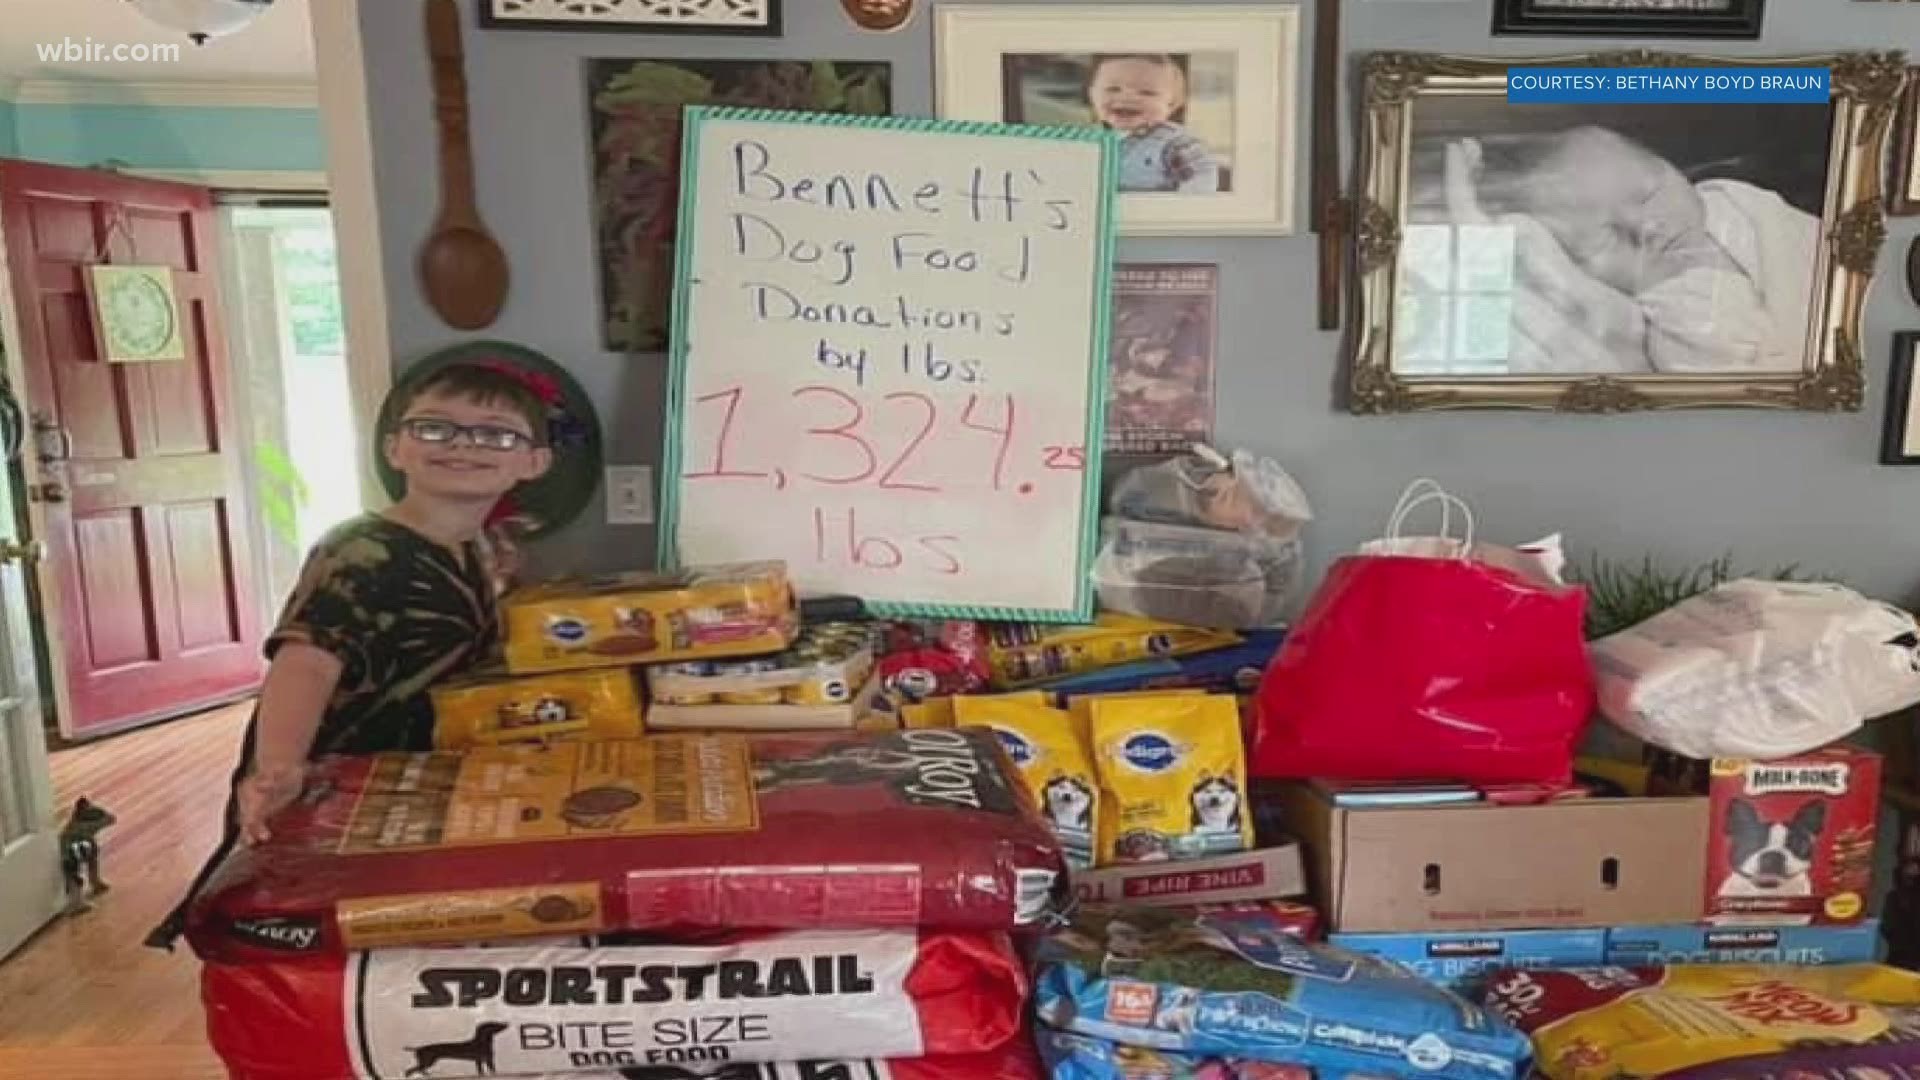 A Tennessee boy is using his birthday as an excuse to help out pets.